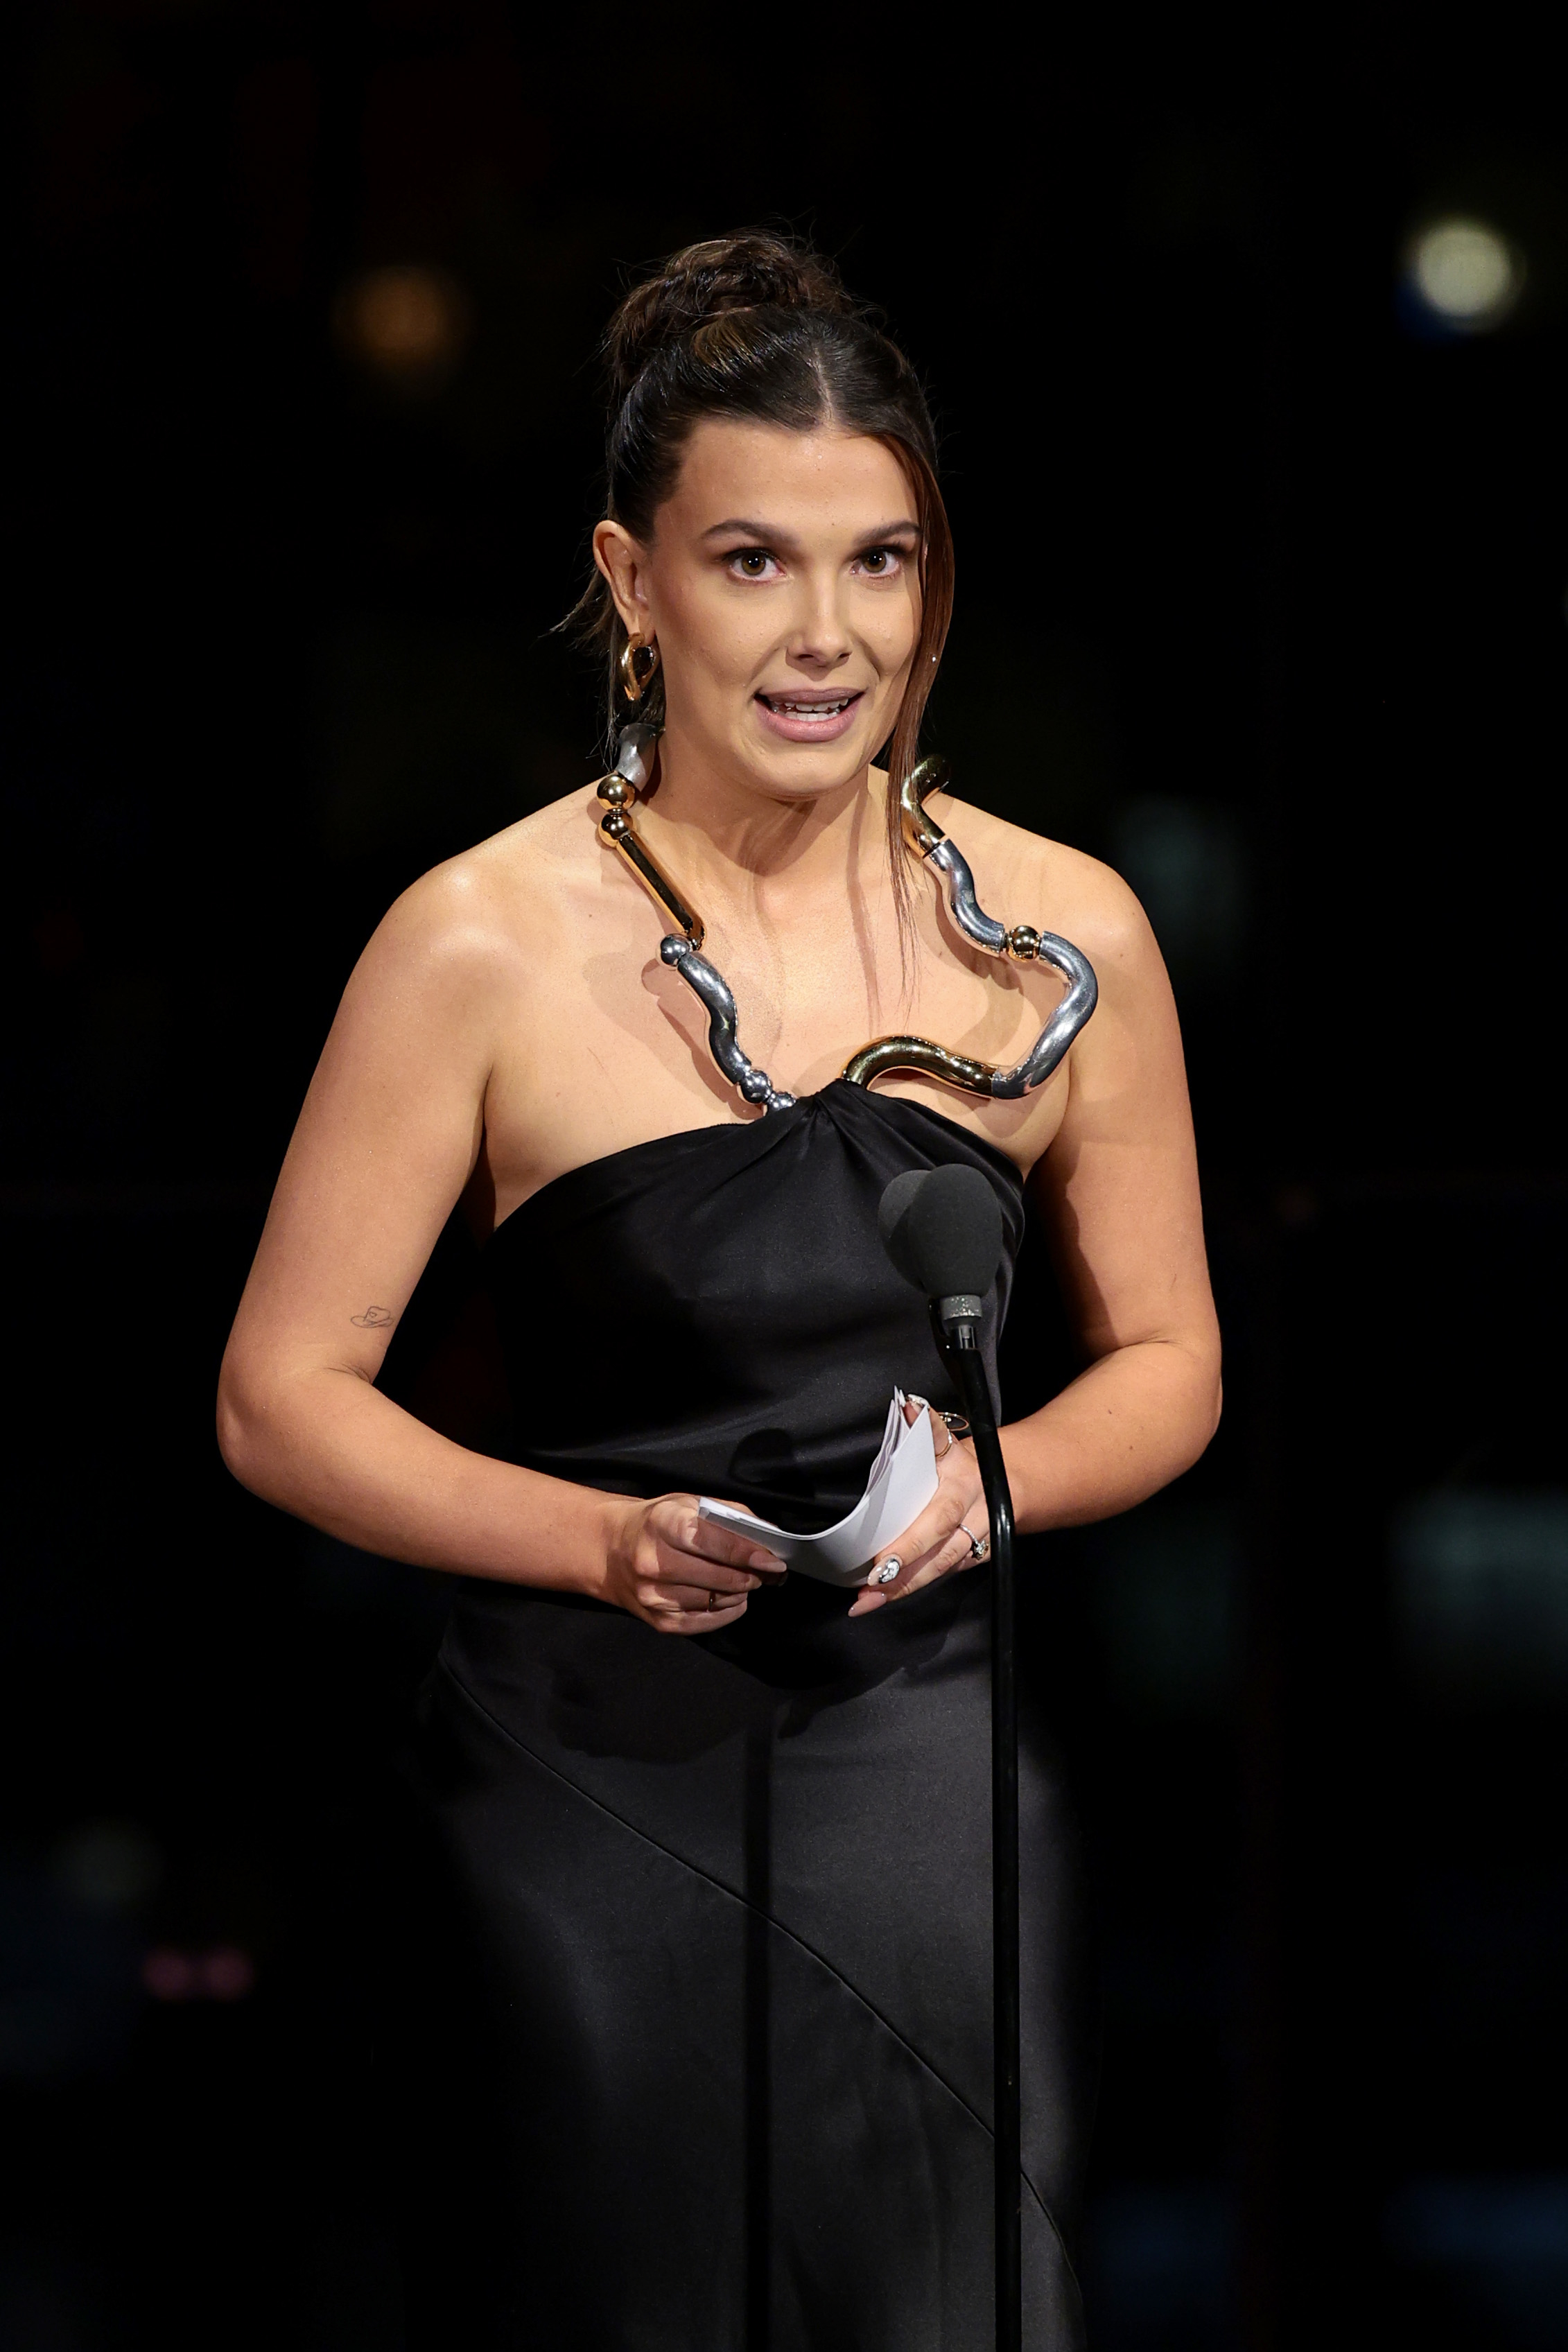 Millie onstage in front of a microphone, wearing a dress with a metal neckline, holding notes